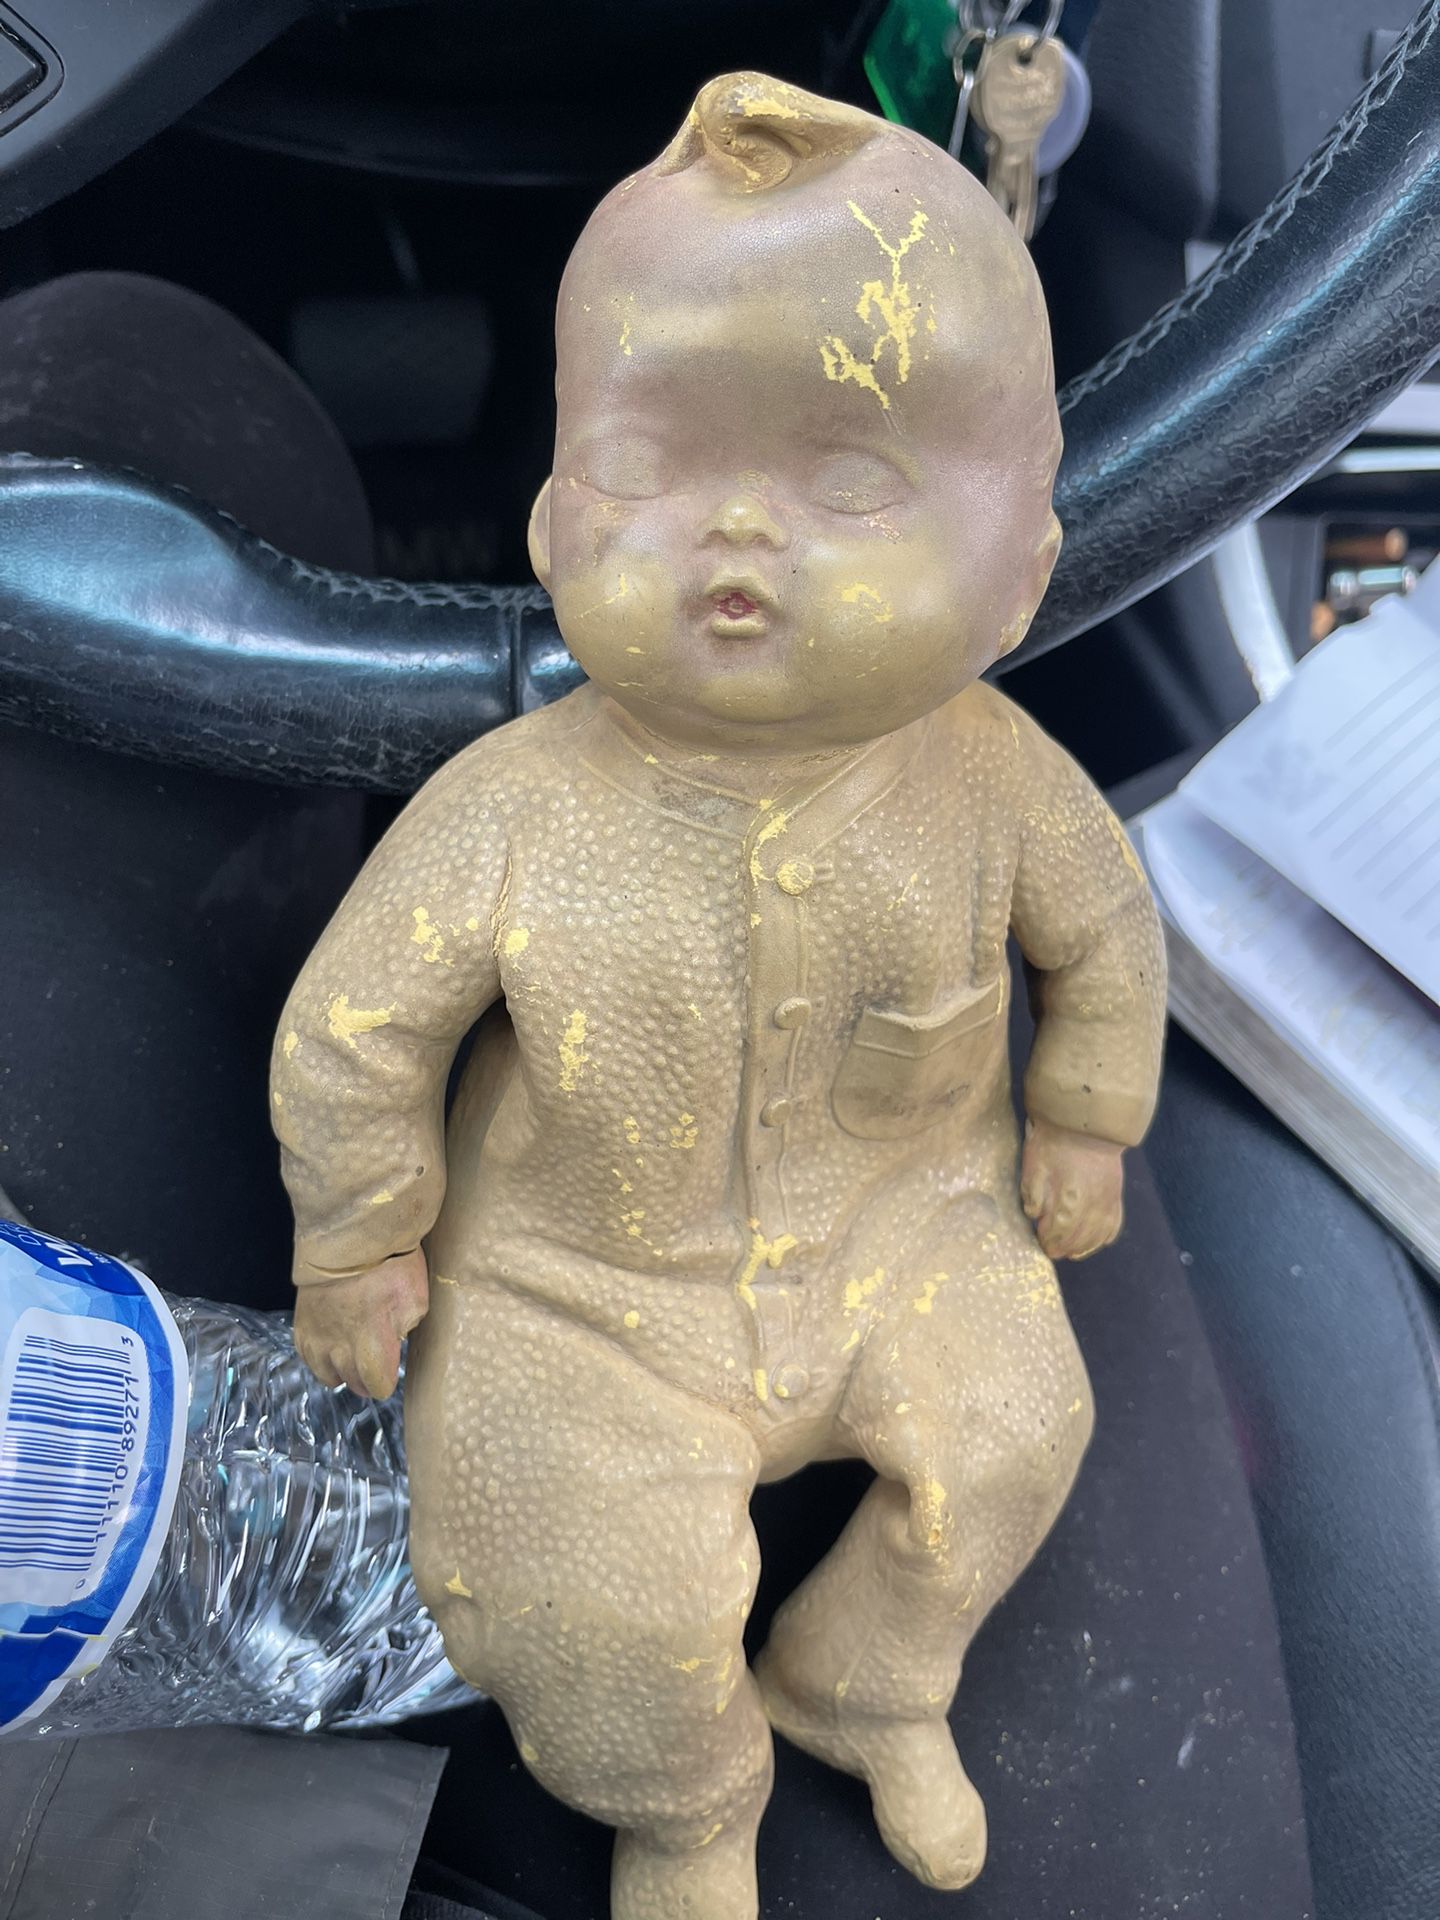 Creepy Antique Rubber Baby Doll